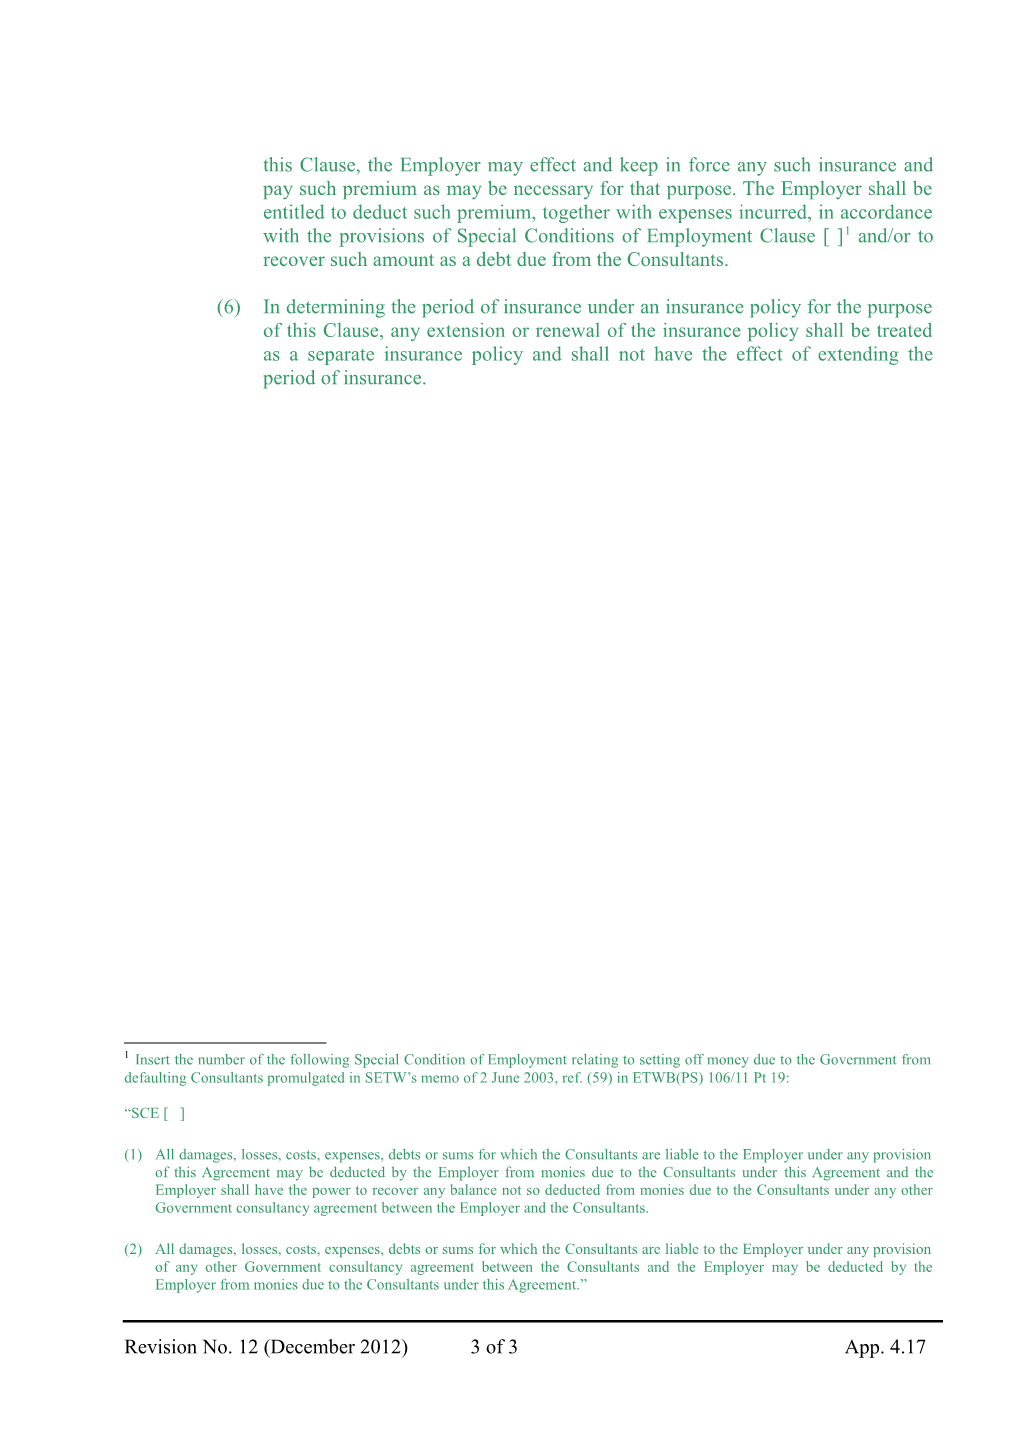 Appendix 4.17STANDARD SPECIAL CONDITIONS of EMPLOYMENT